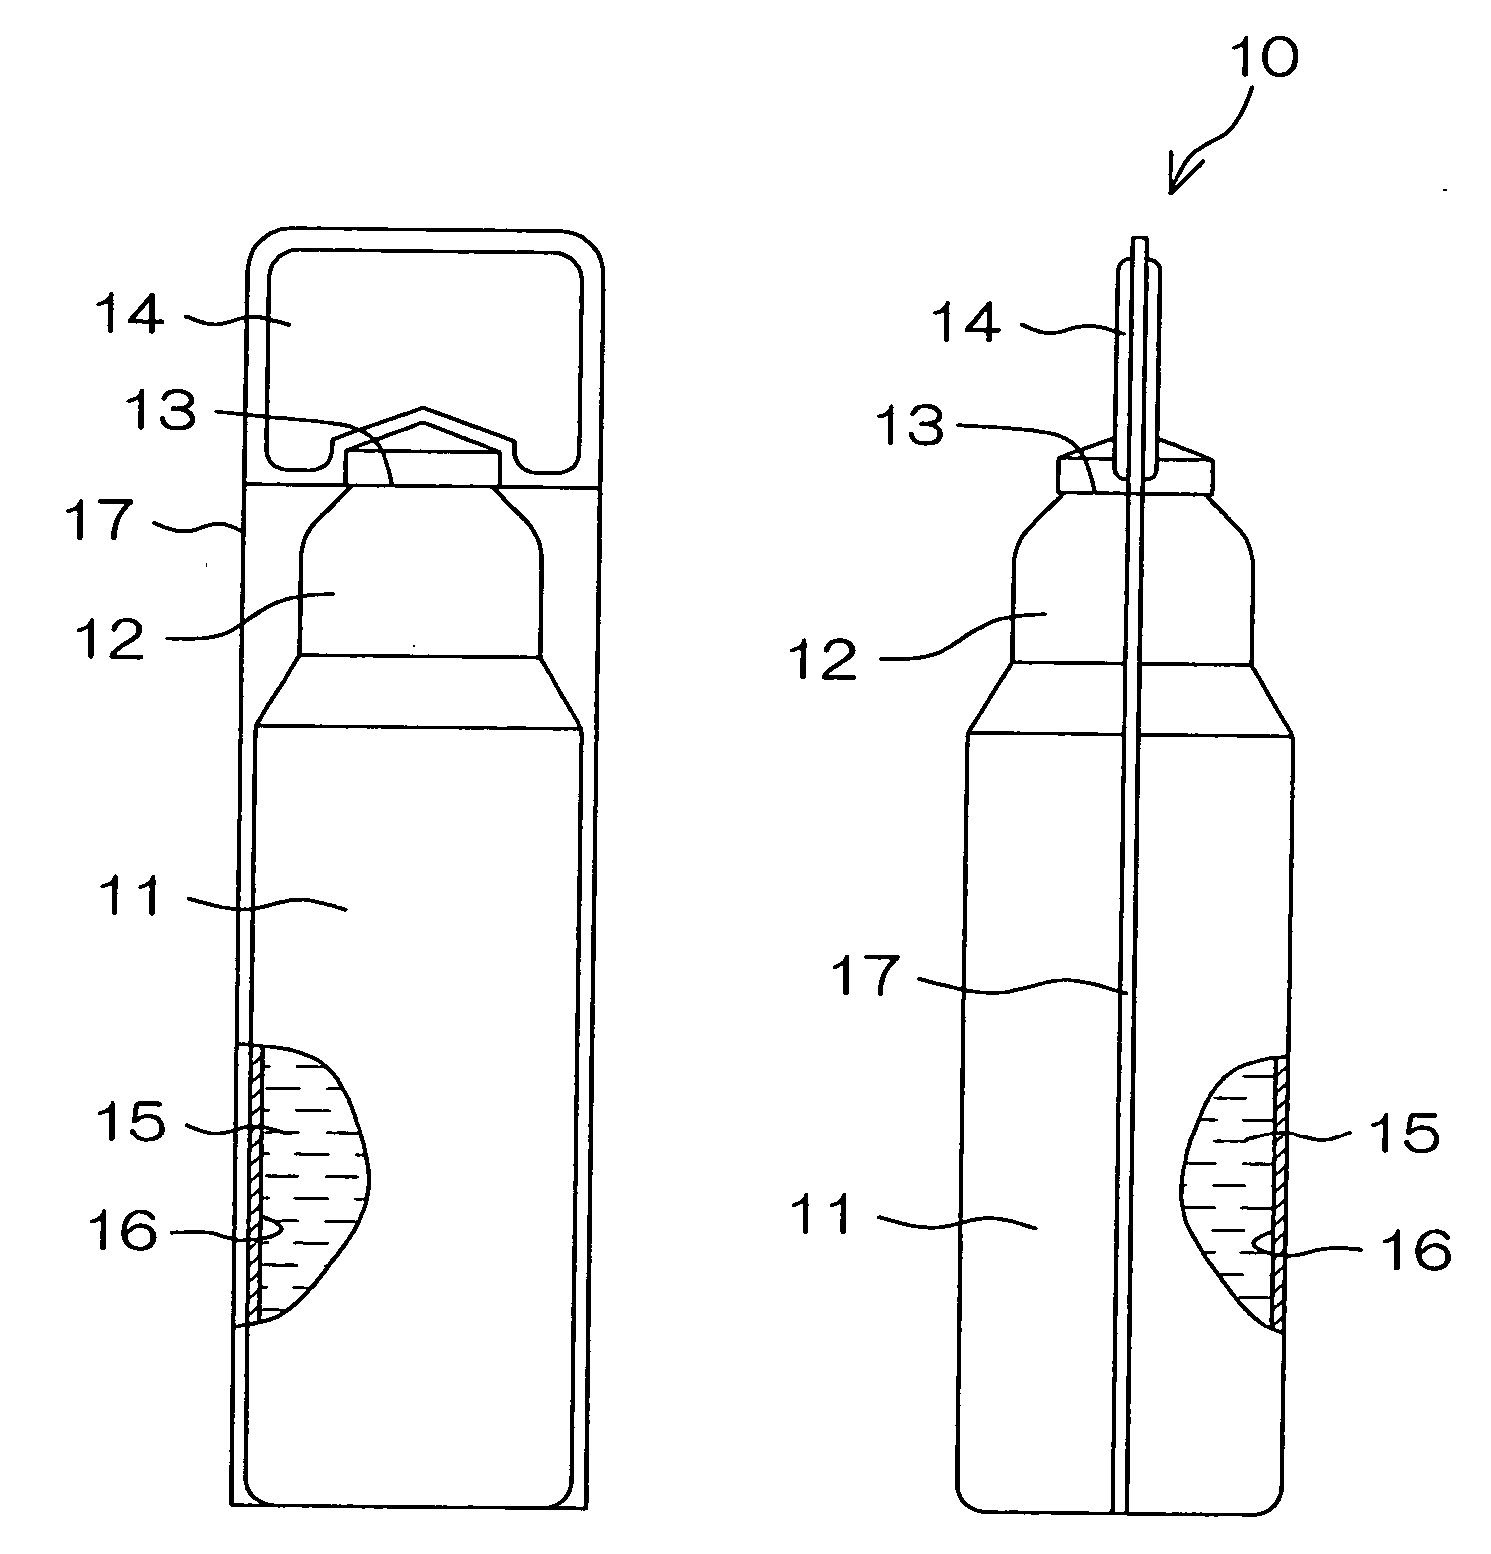 Drug solution filling plastic ampoule and process for producing the same